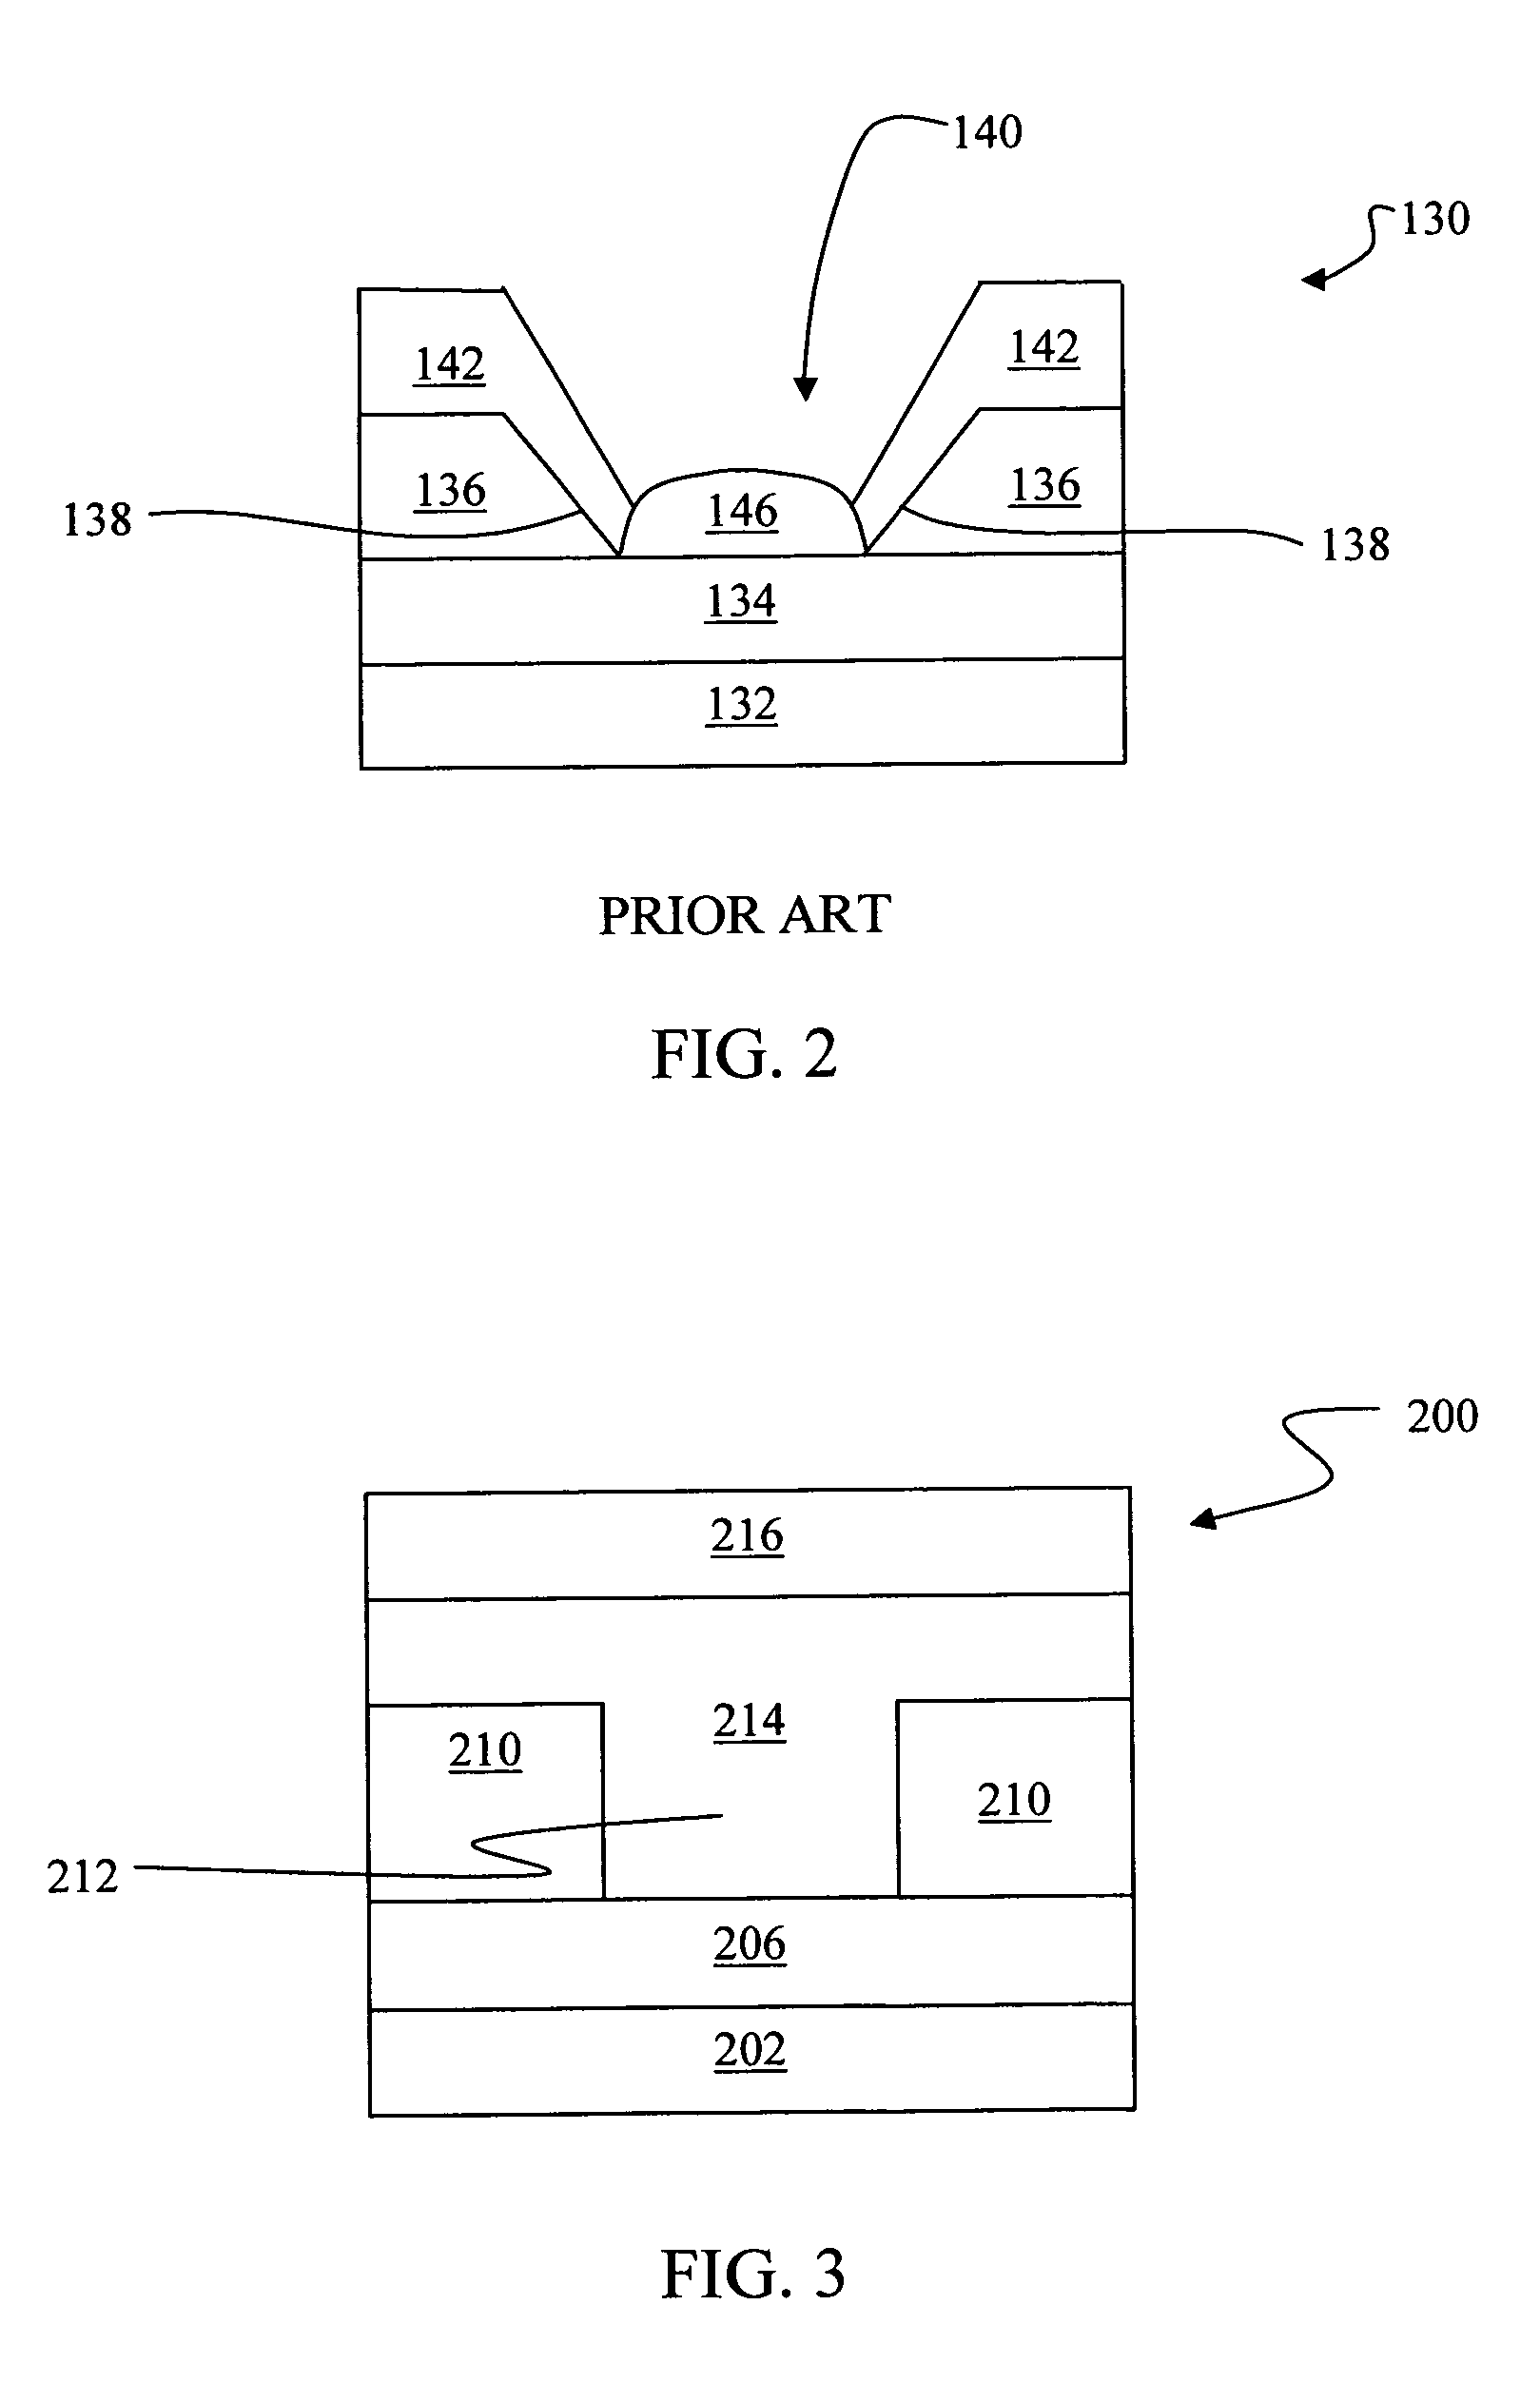 Pressure extrusion method for filling features in the fabrication of electronic devices